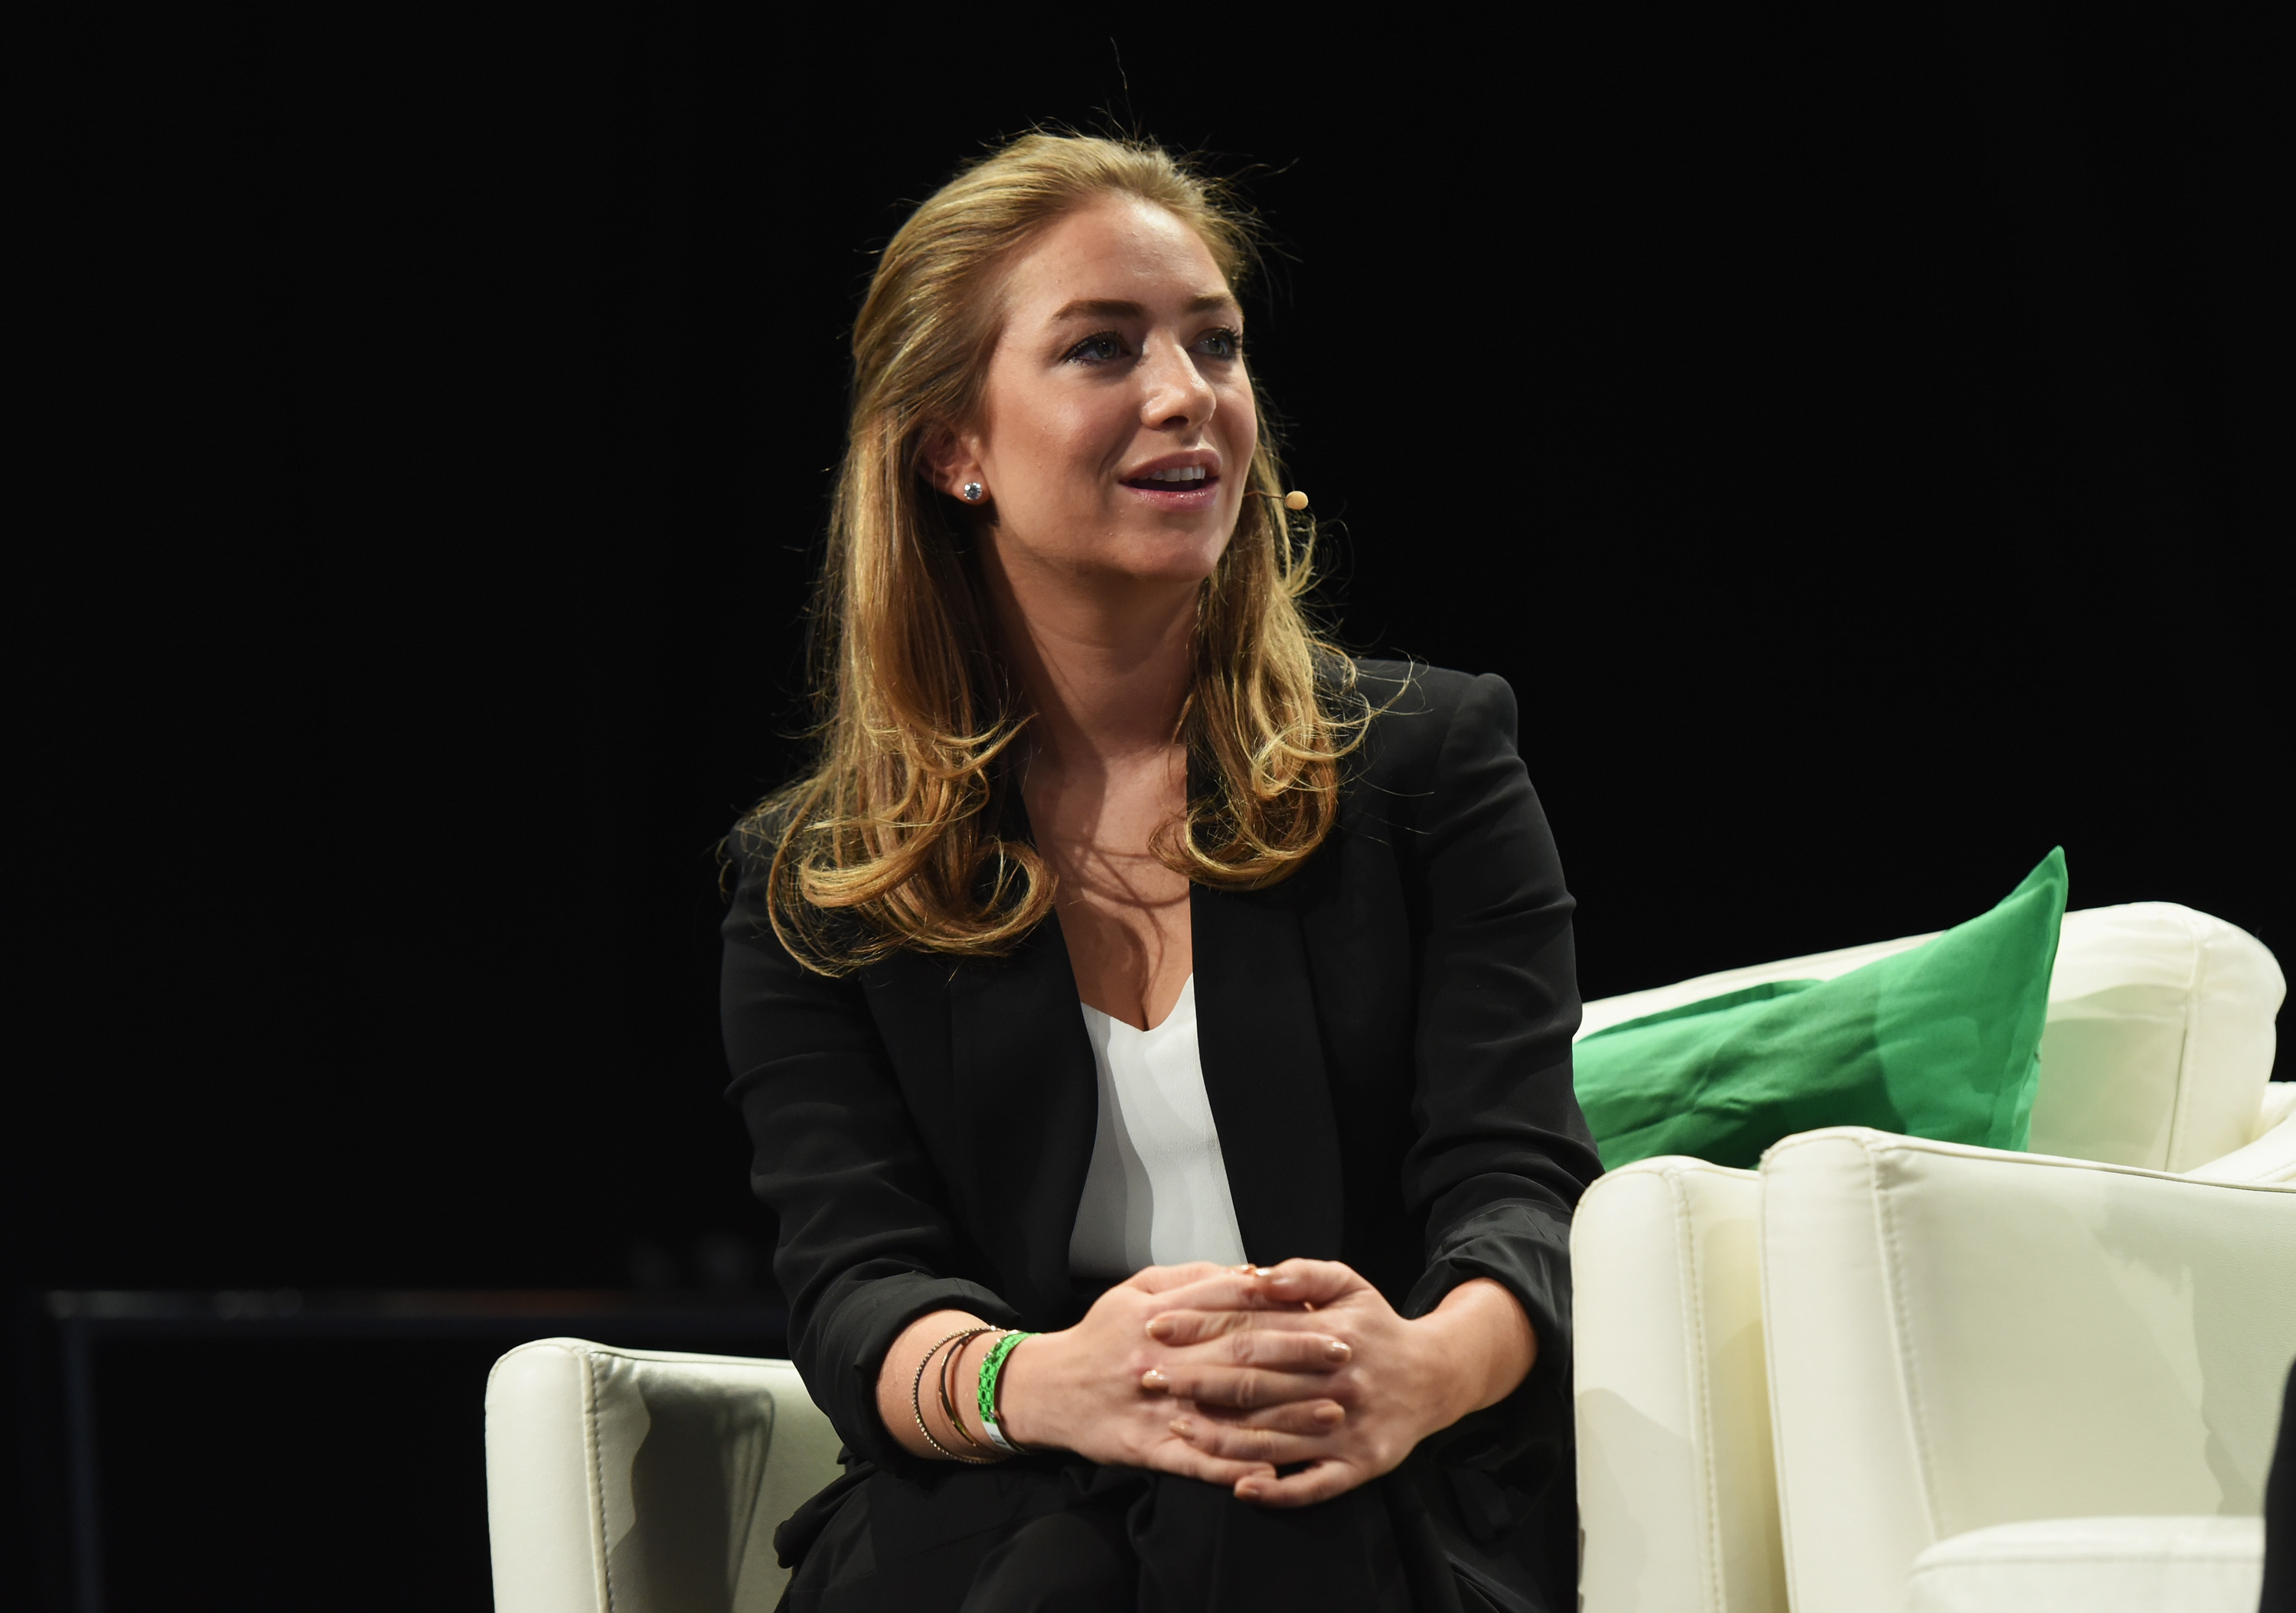 Co-founder and CEO of Bumble Whitney Wolfe speaks onstage during TechCrunch Disrupt NY 2016 at Brooklyn Cruise Terminal on May 11, 2016 in New York City.  (Noam Galai--Getty Images for TechCrunch) (Noam Galai&mdash;Getty Images for TechCrunch)